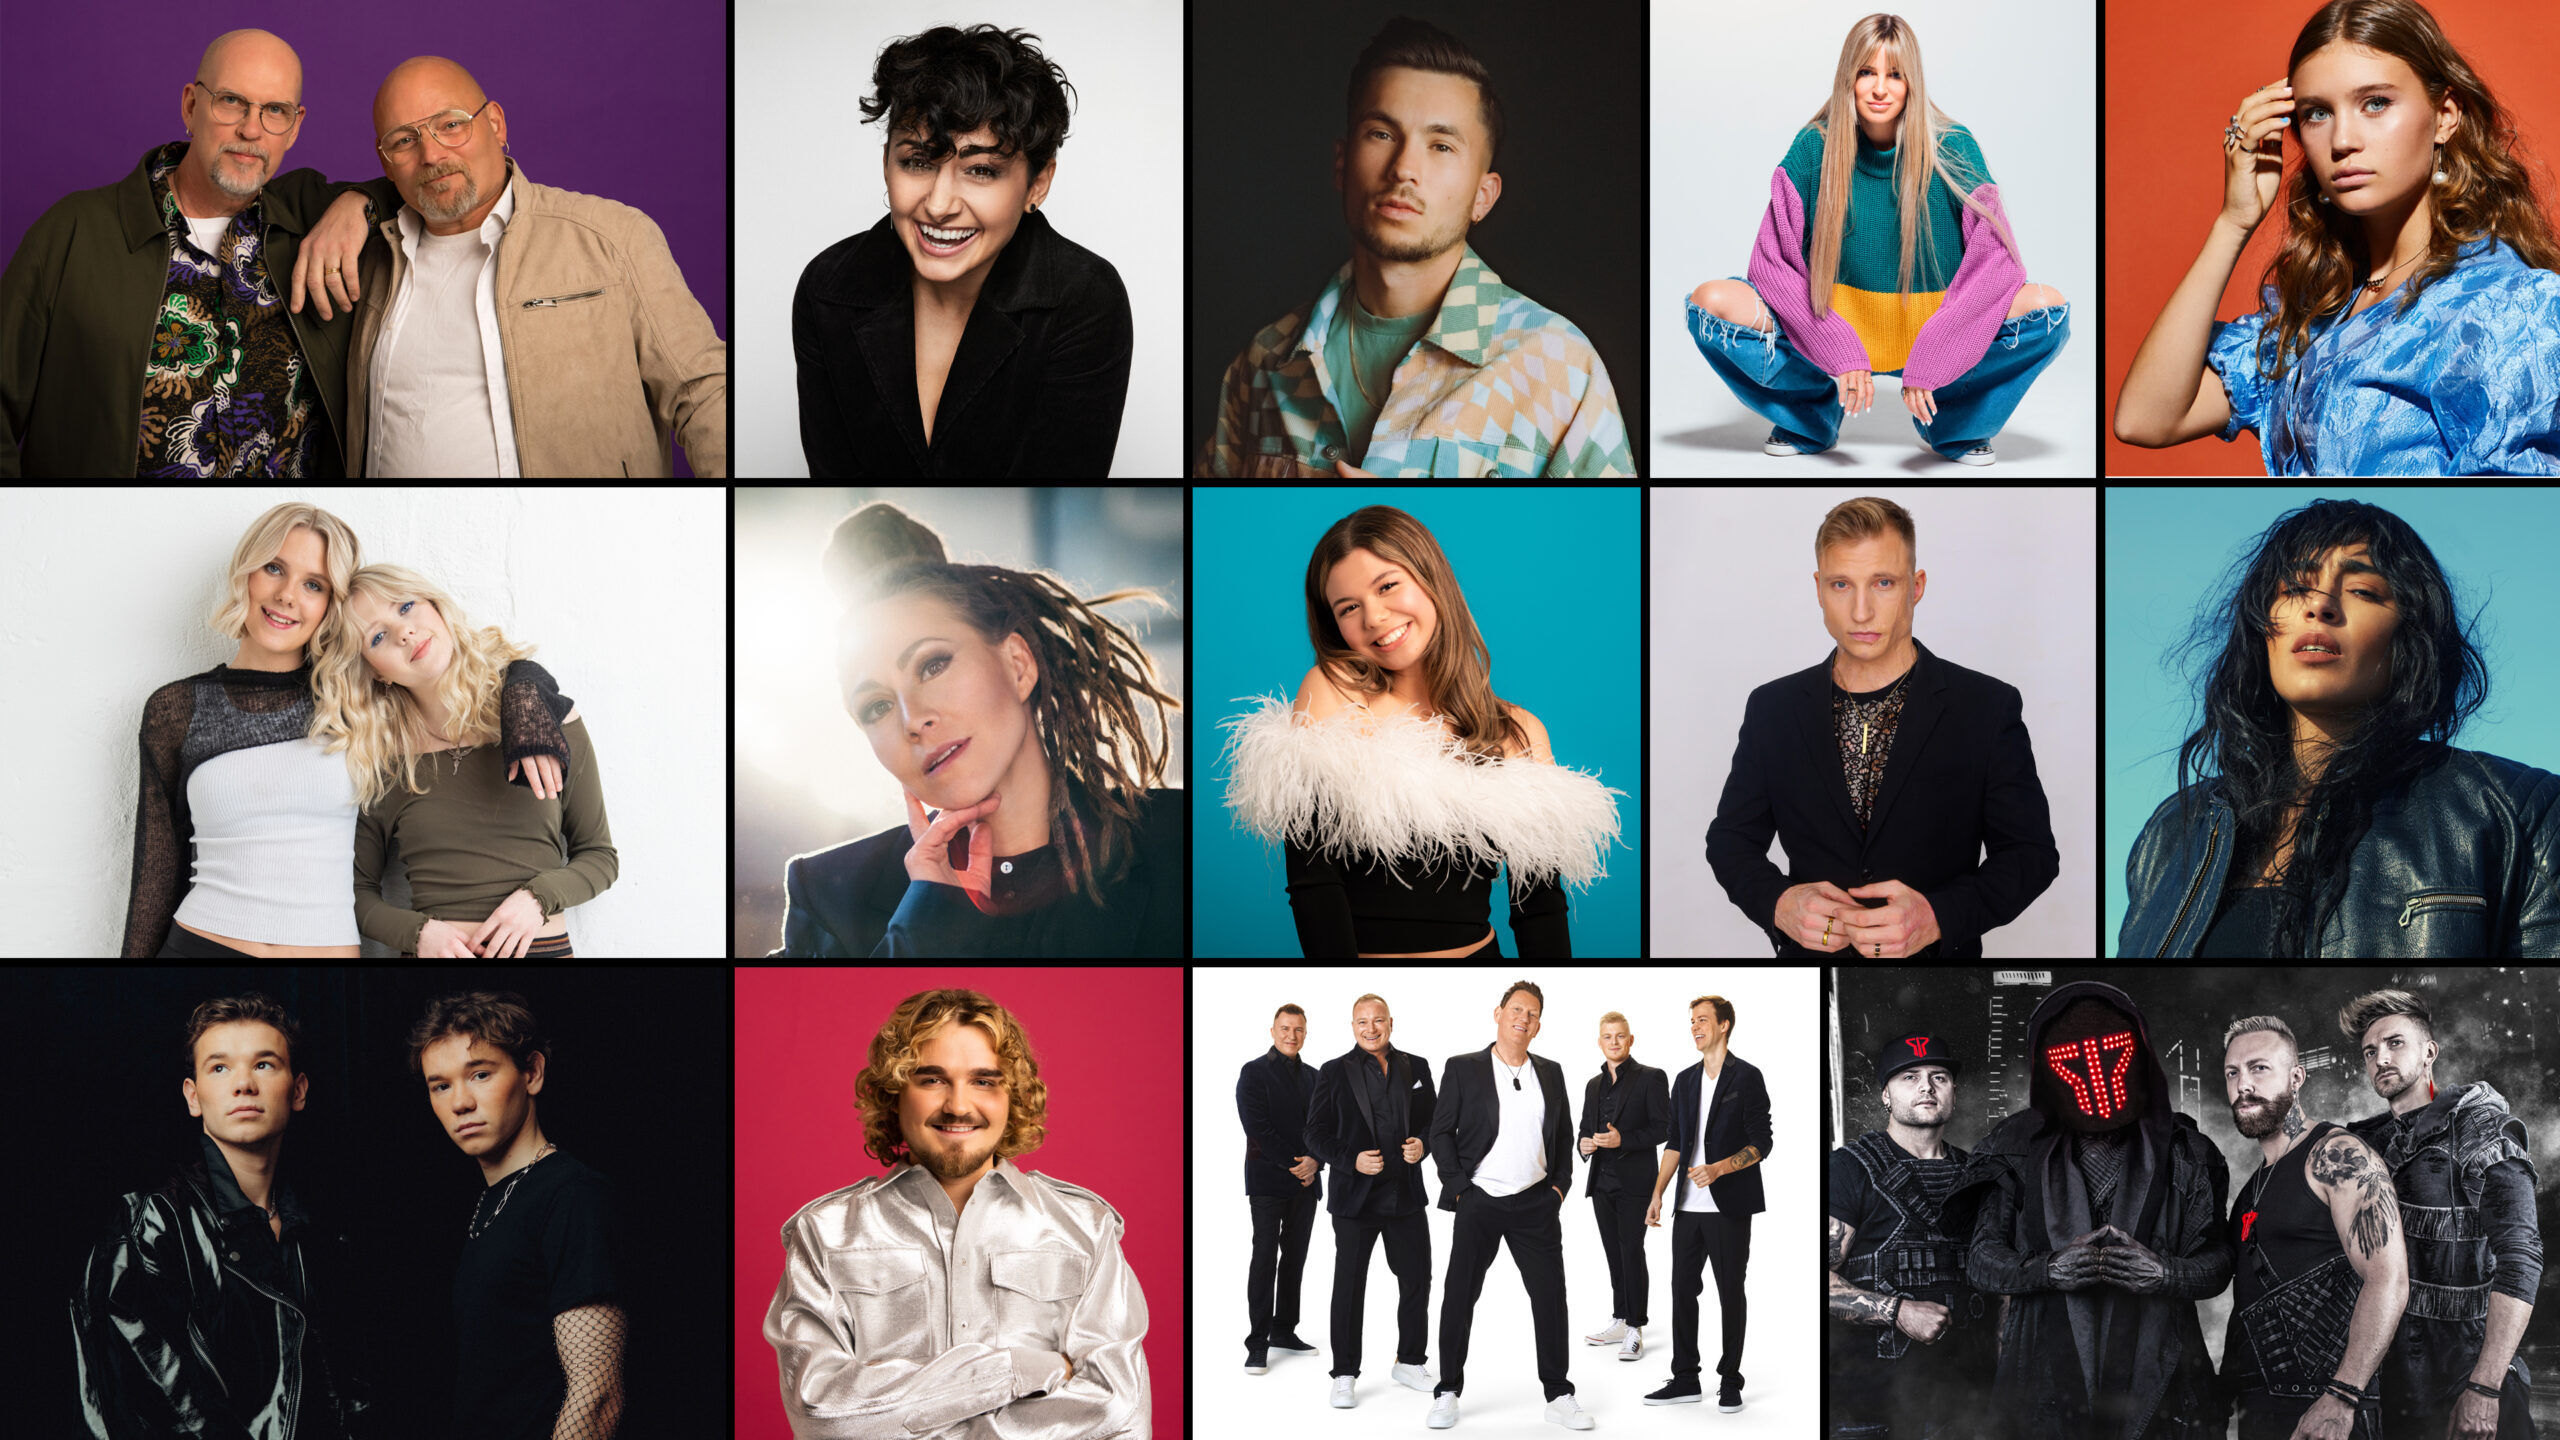 Sweden: Here are the 28 acts competing in Melodifestivalen 2023